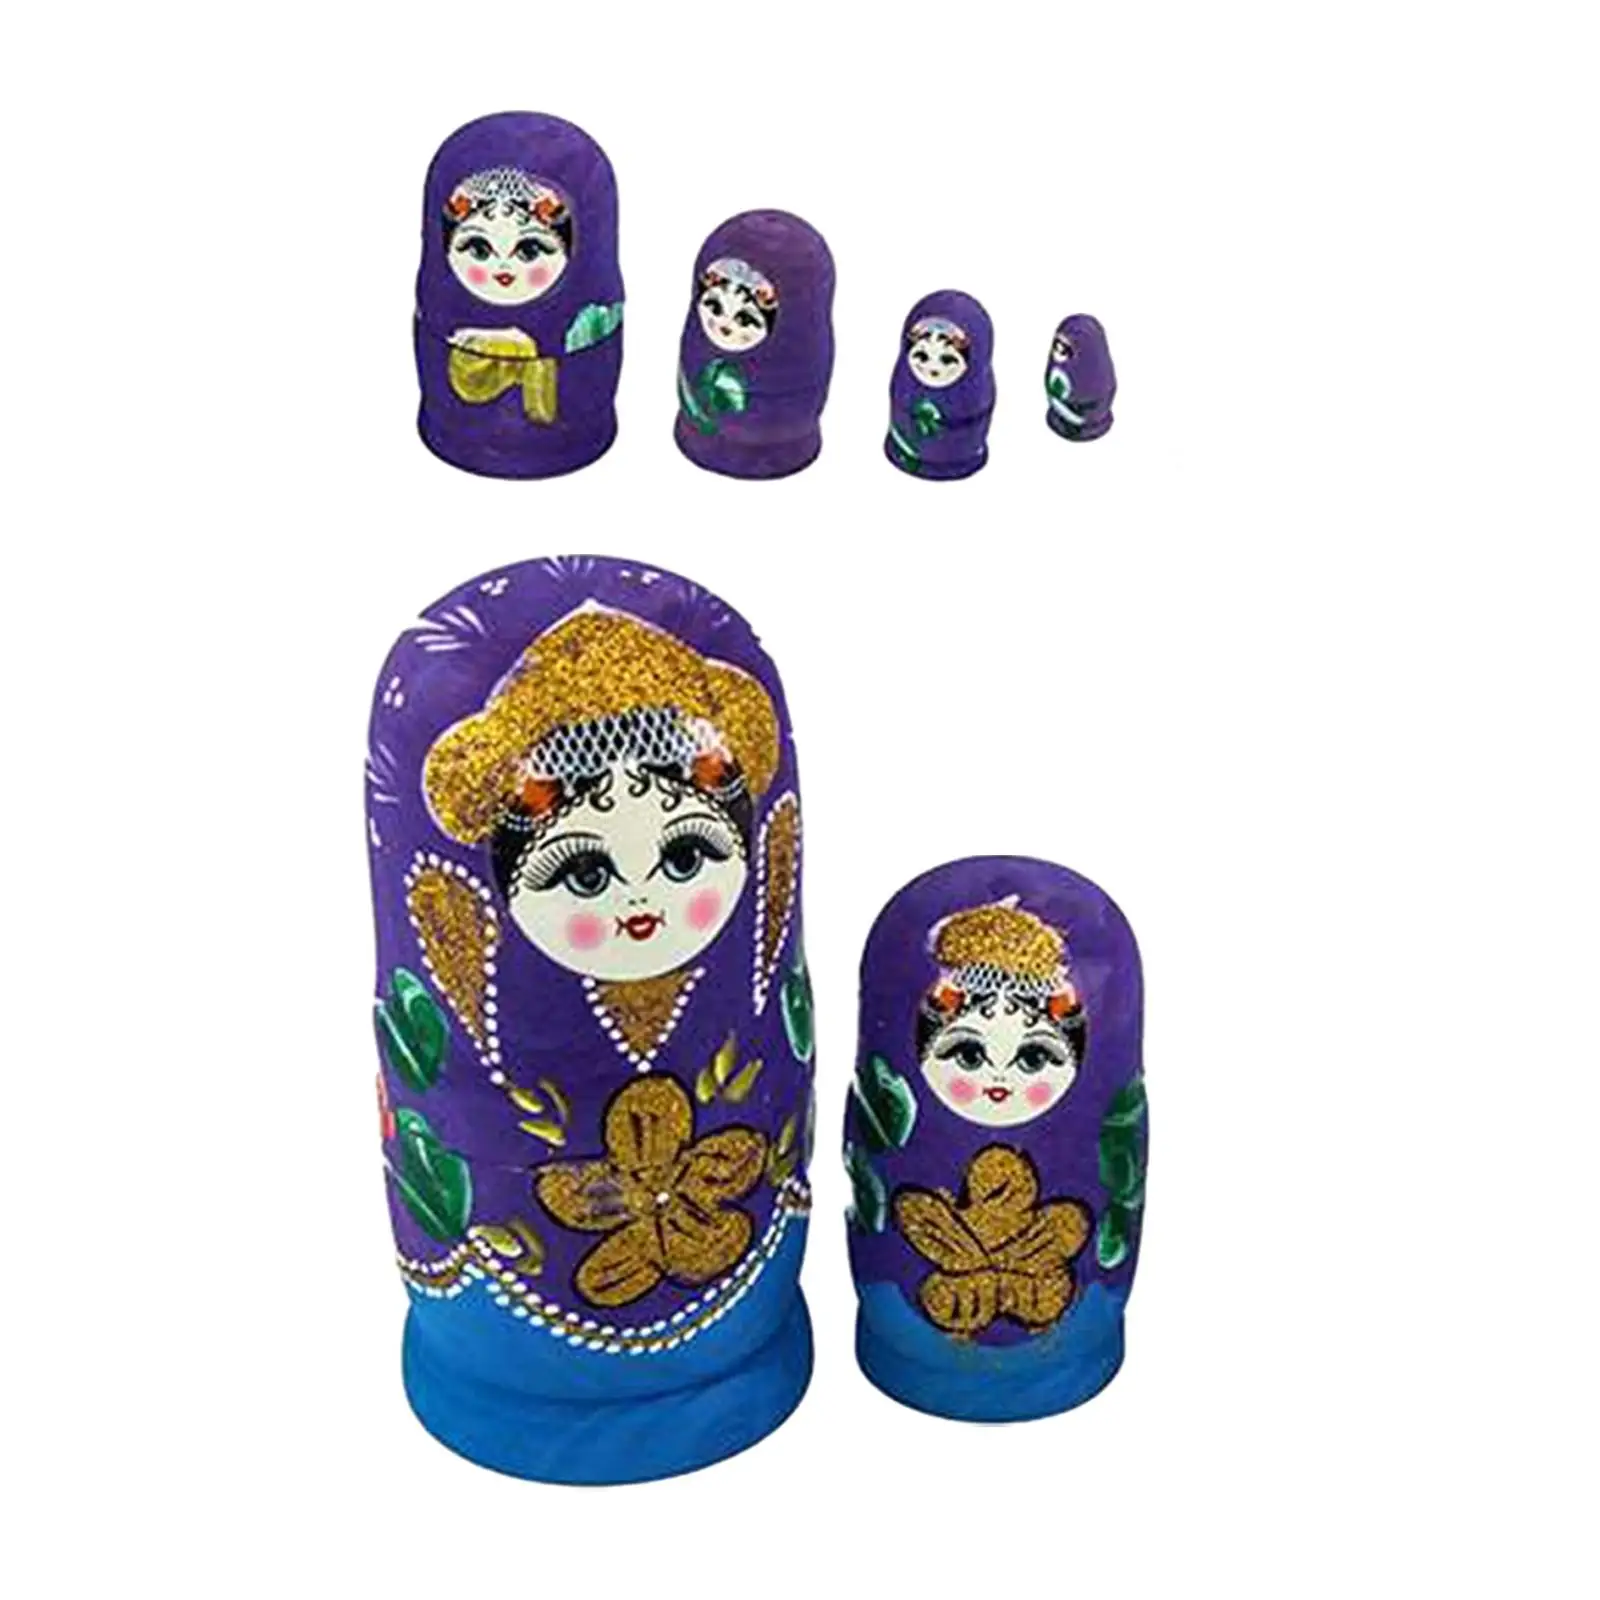 7Pcs Nesting Doll, Matryoshka Dolls, Collectible Crafts, Stackable Nesting Wishing Dolls for Birthday, Table Office